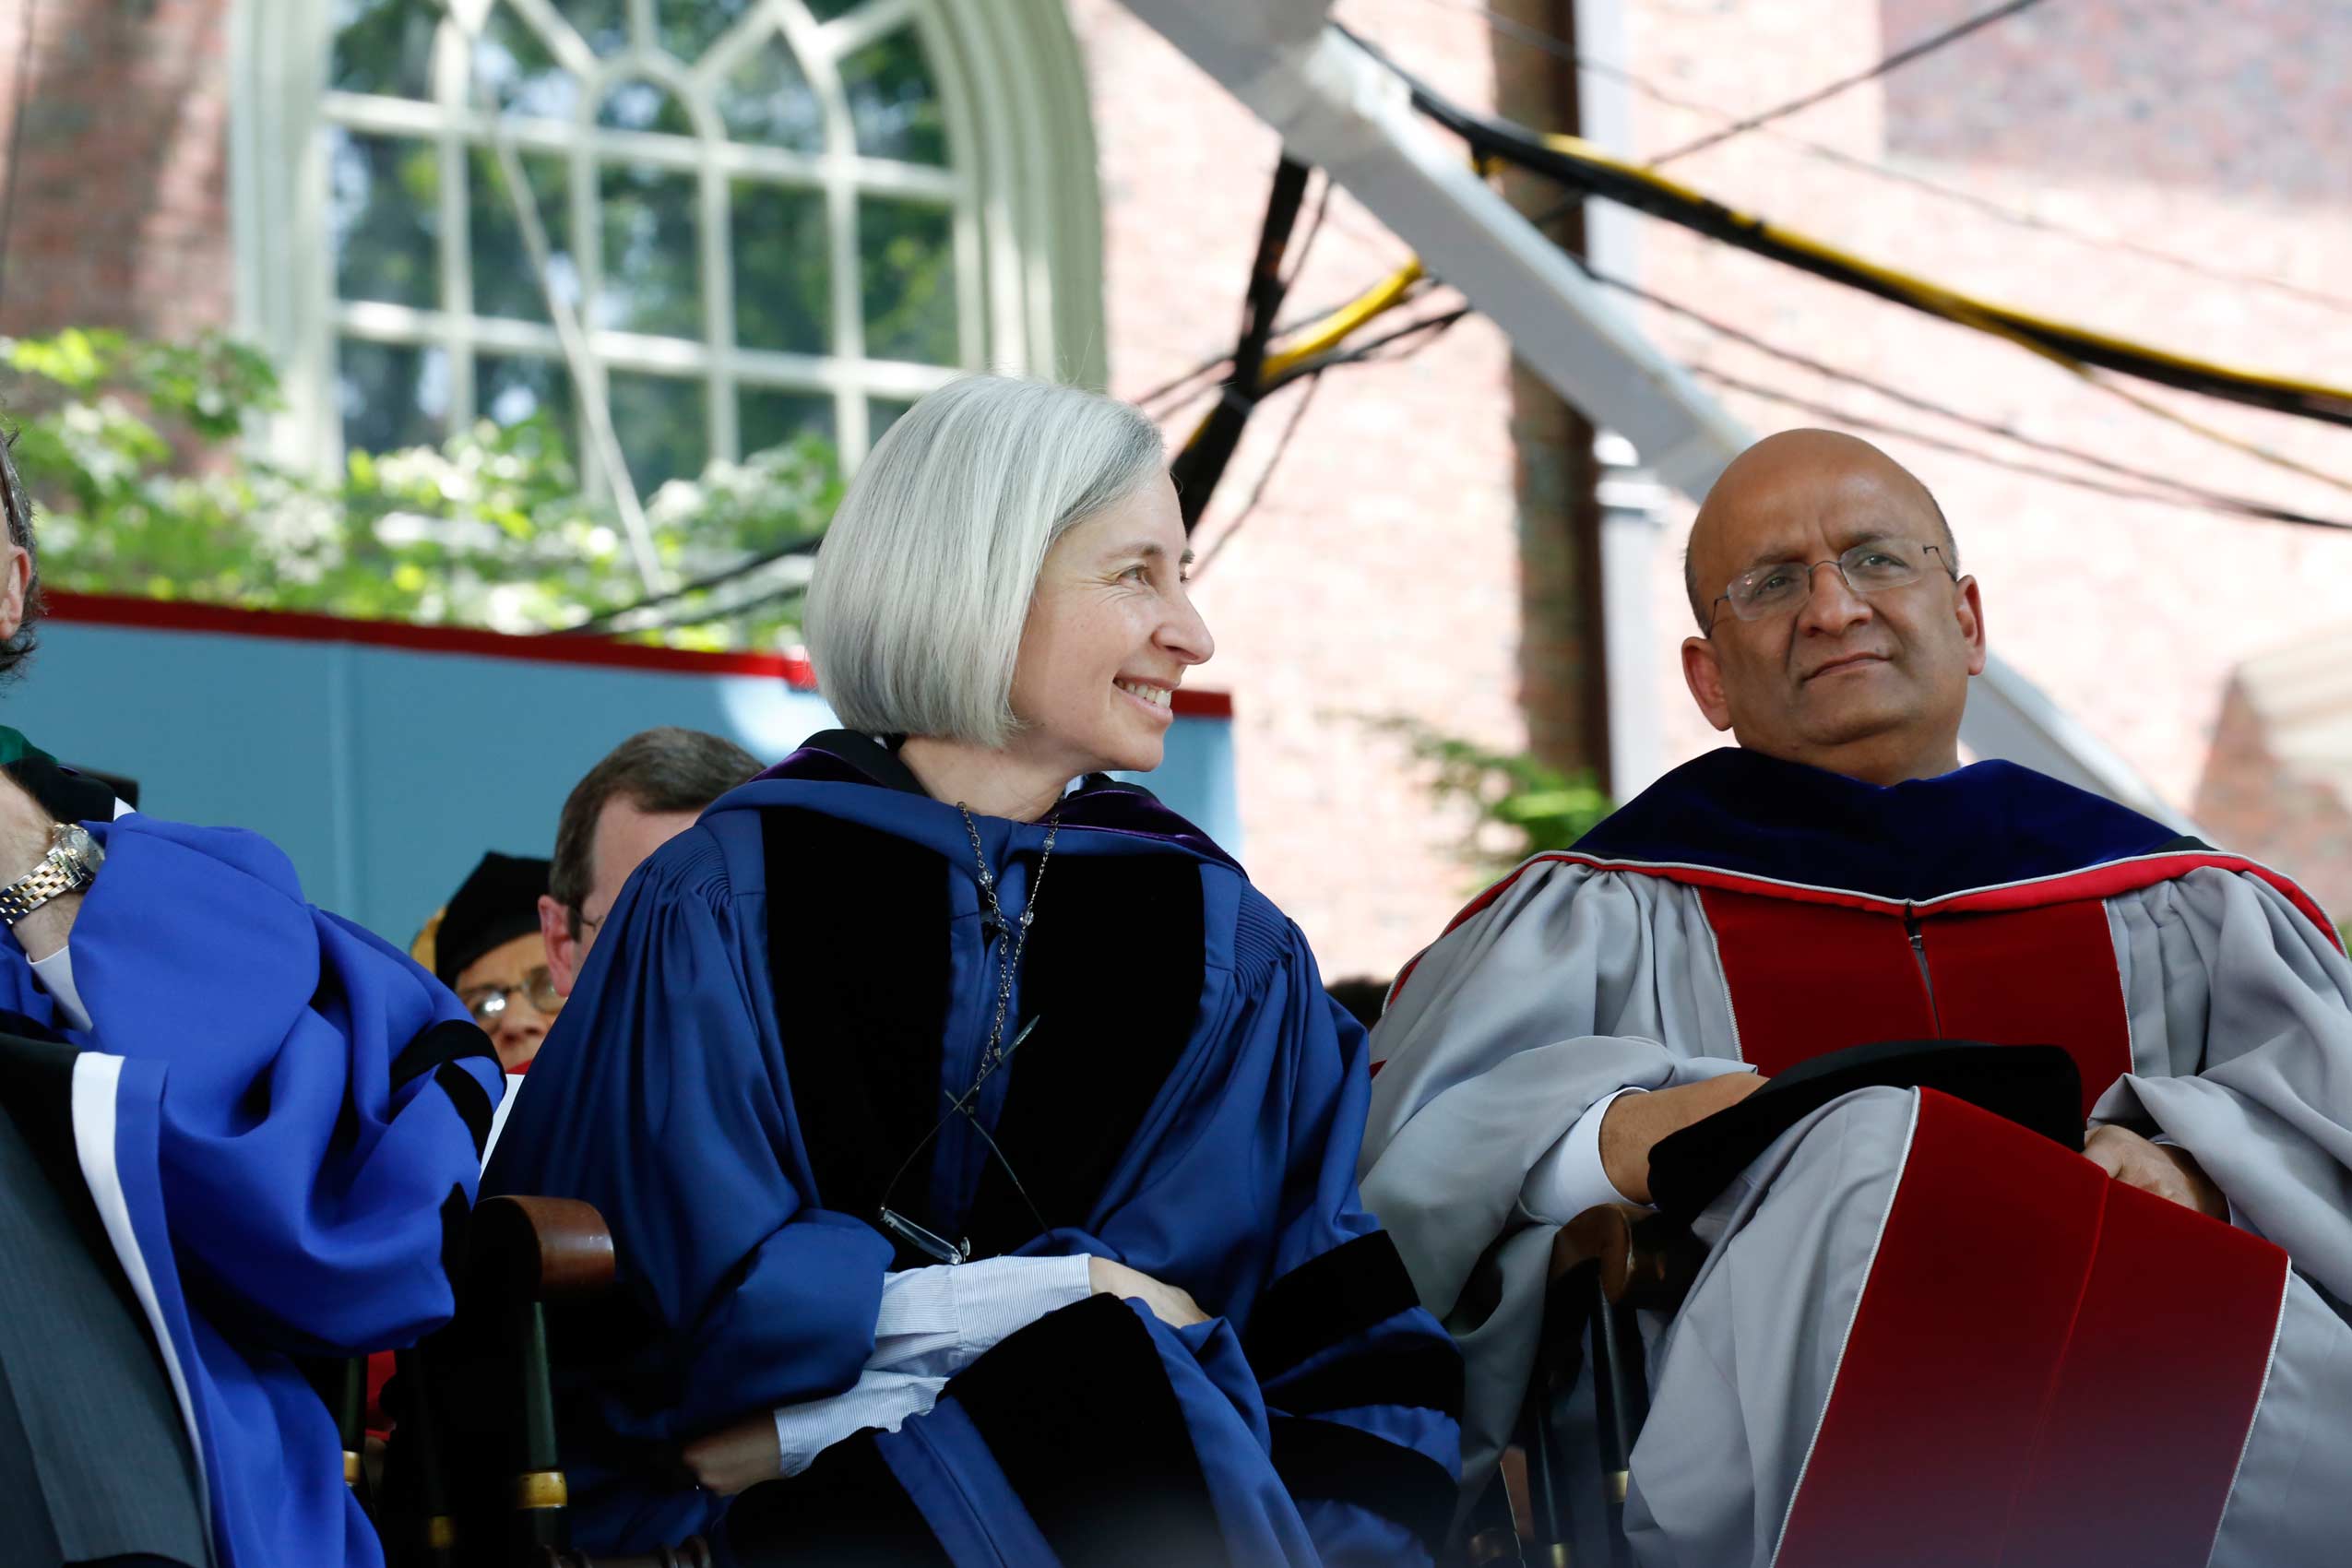 Dean Martha Minow wearing blue gown and smiling with another man wearing a silver and red gown